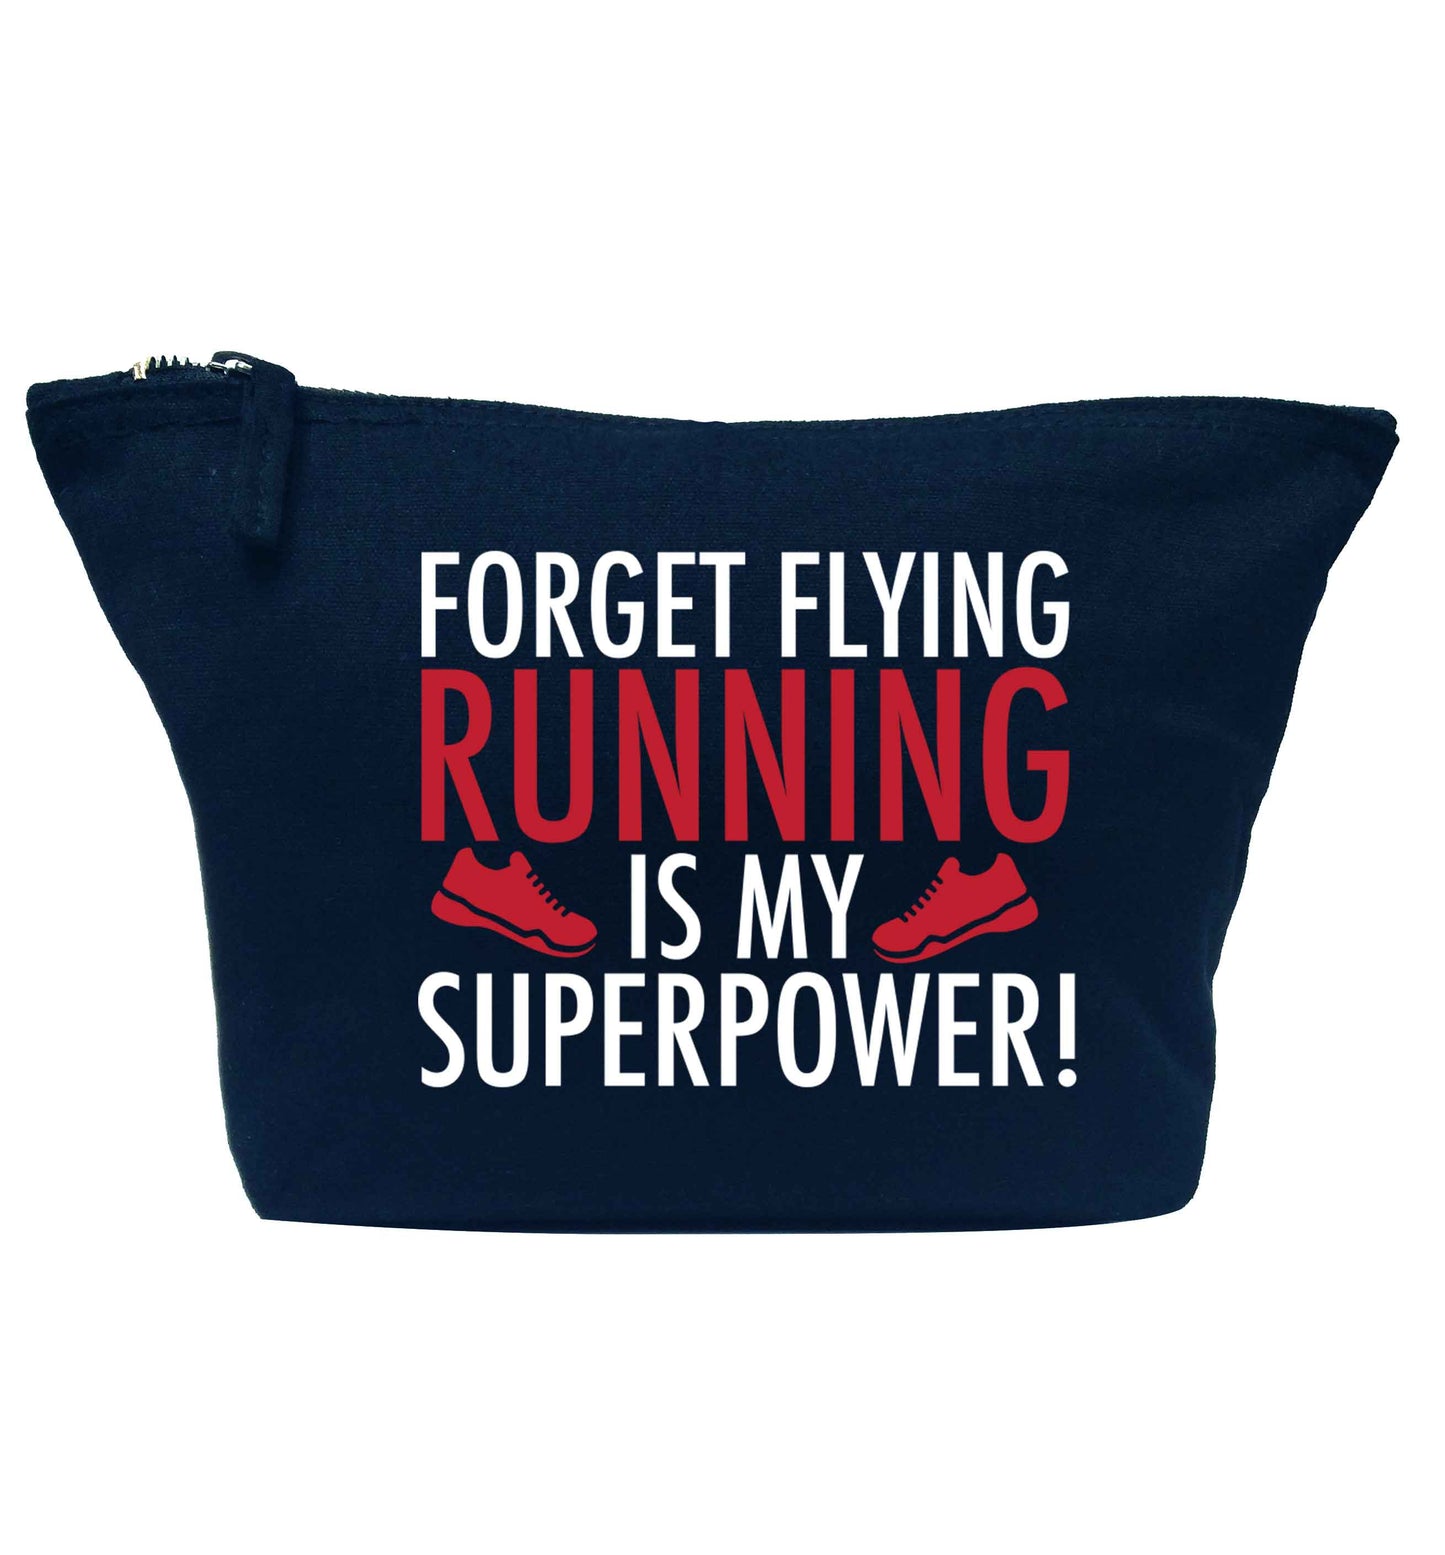 Forget flying running is my superpower navy makeup bag